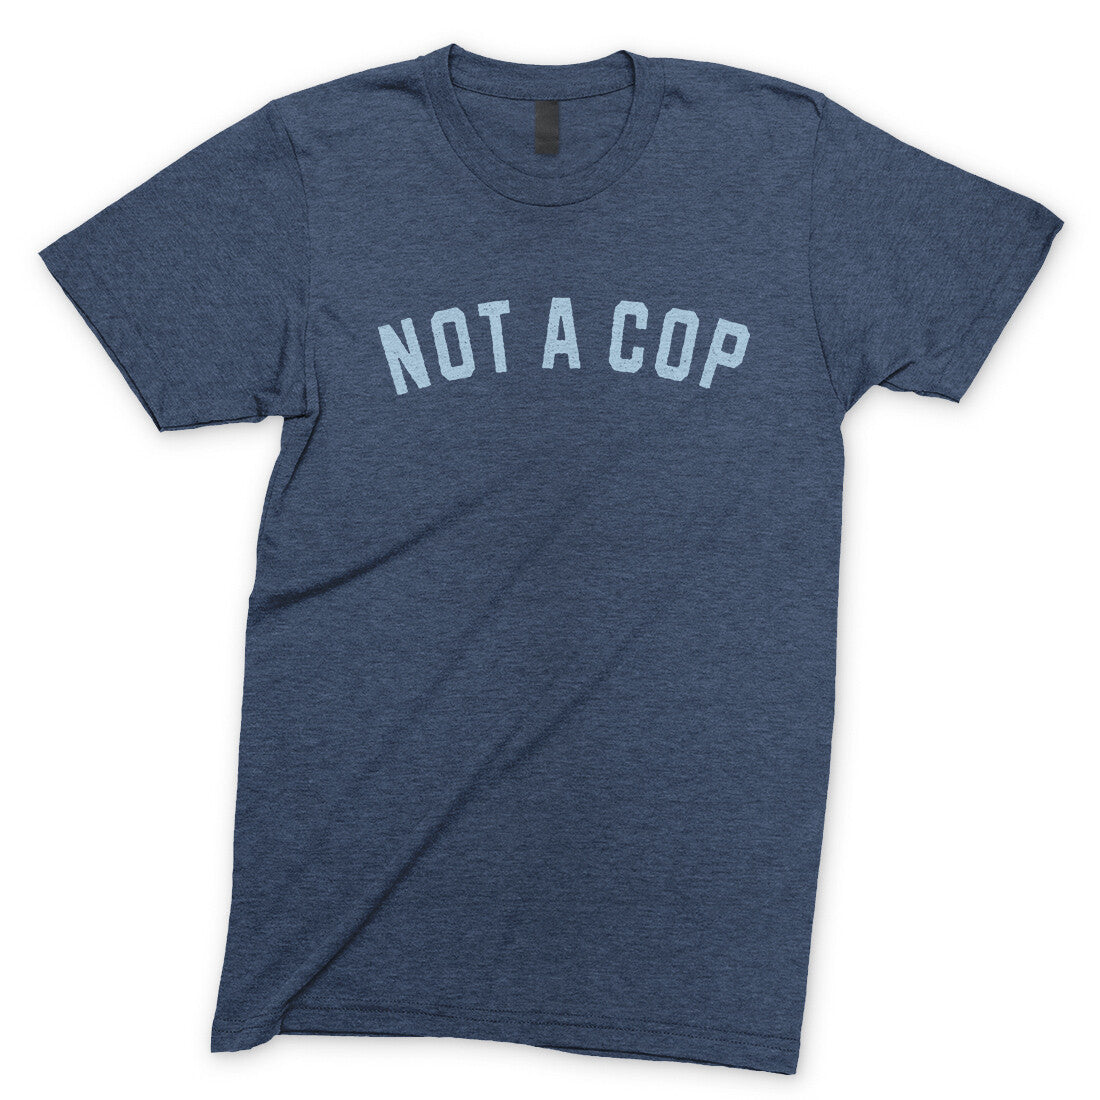 Not a Cop in Navy Heather Color